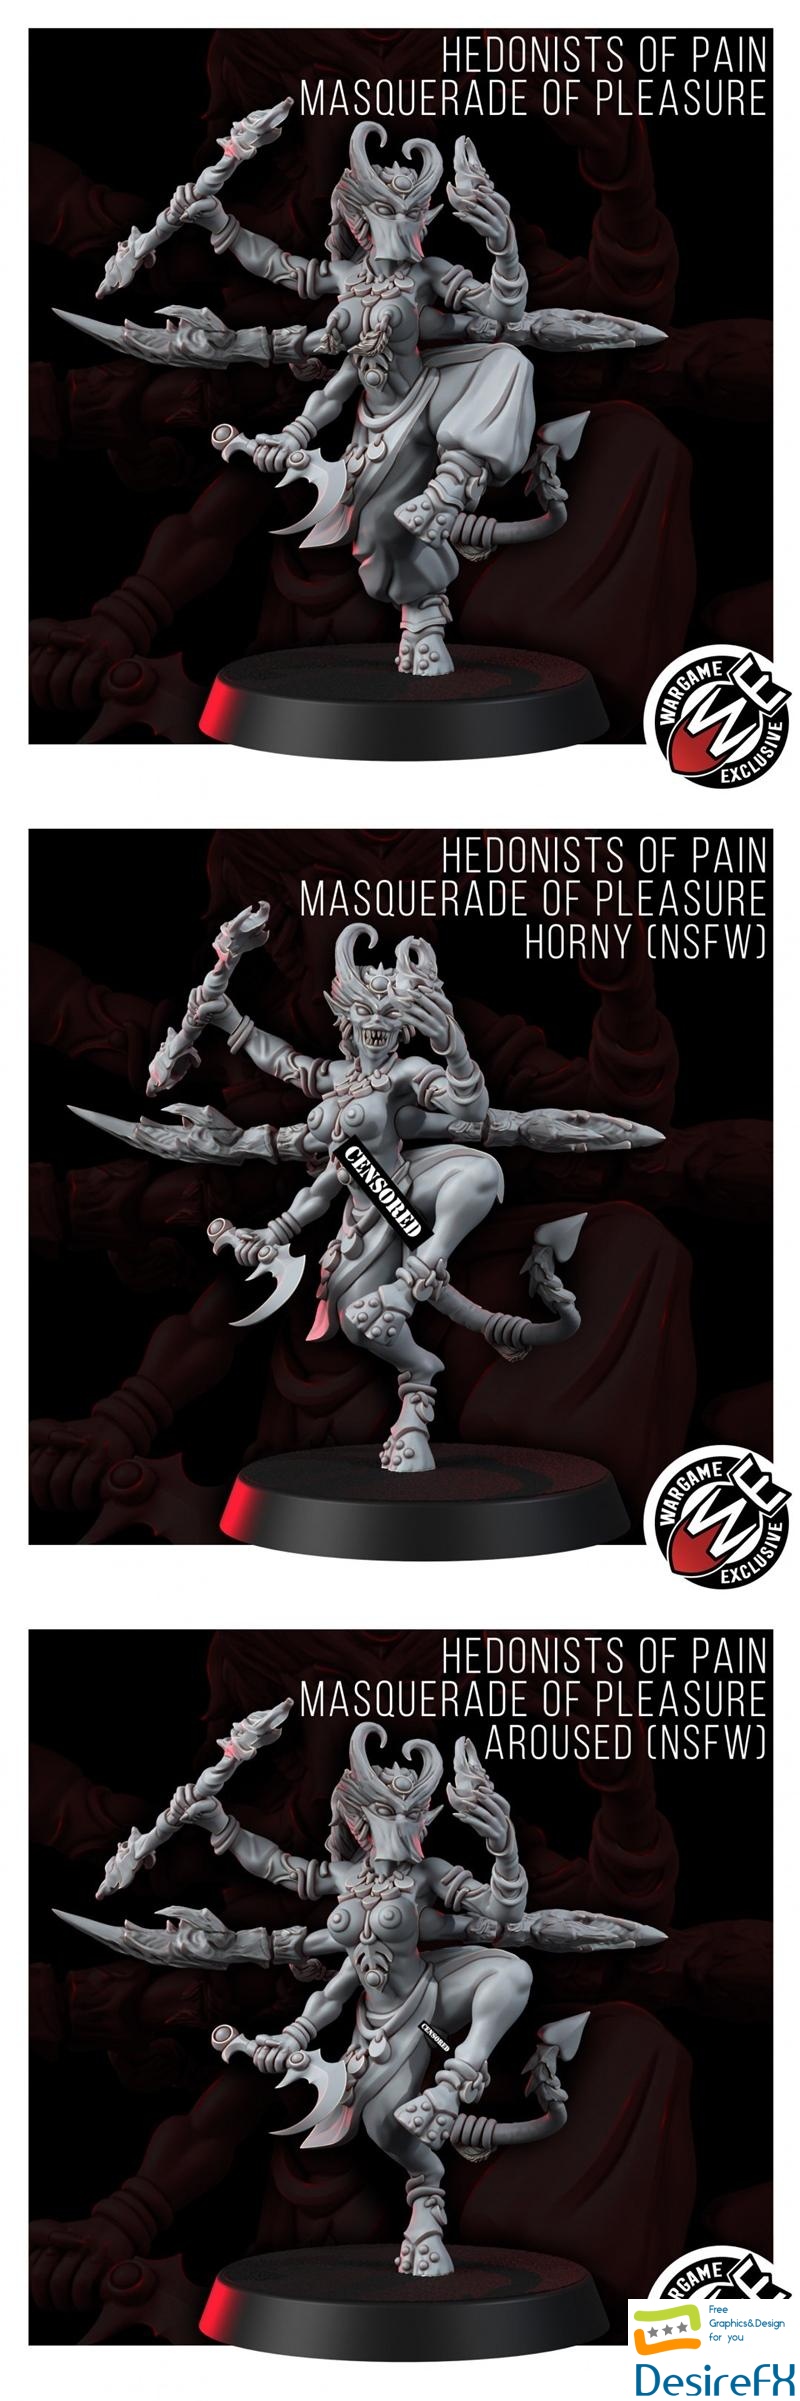 Hedonists Of Pain Masquerade Of Pleasure and Aroused and Horny 3D Print